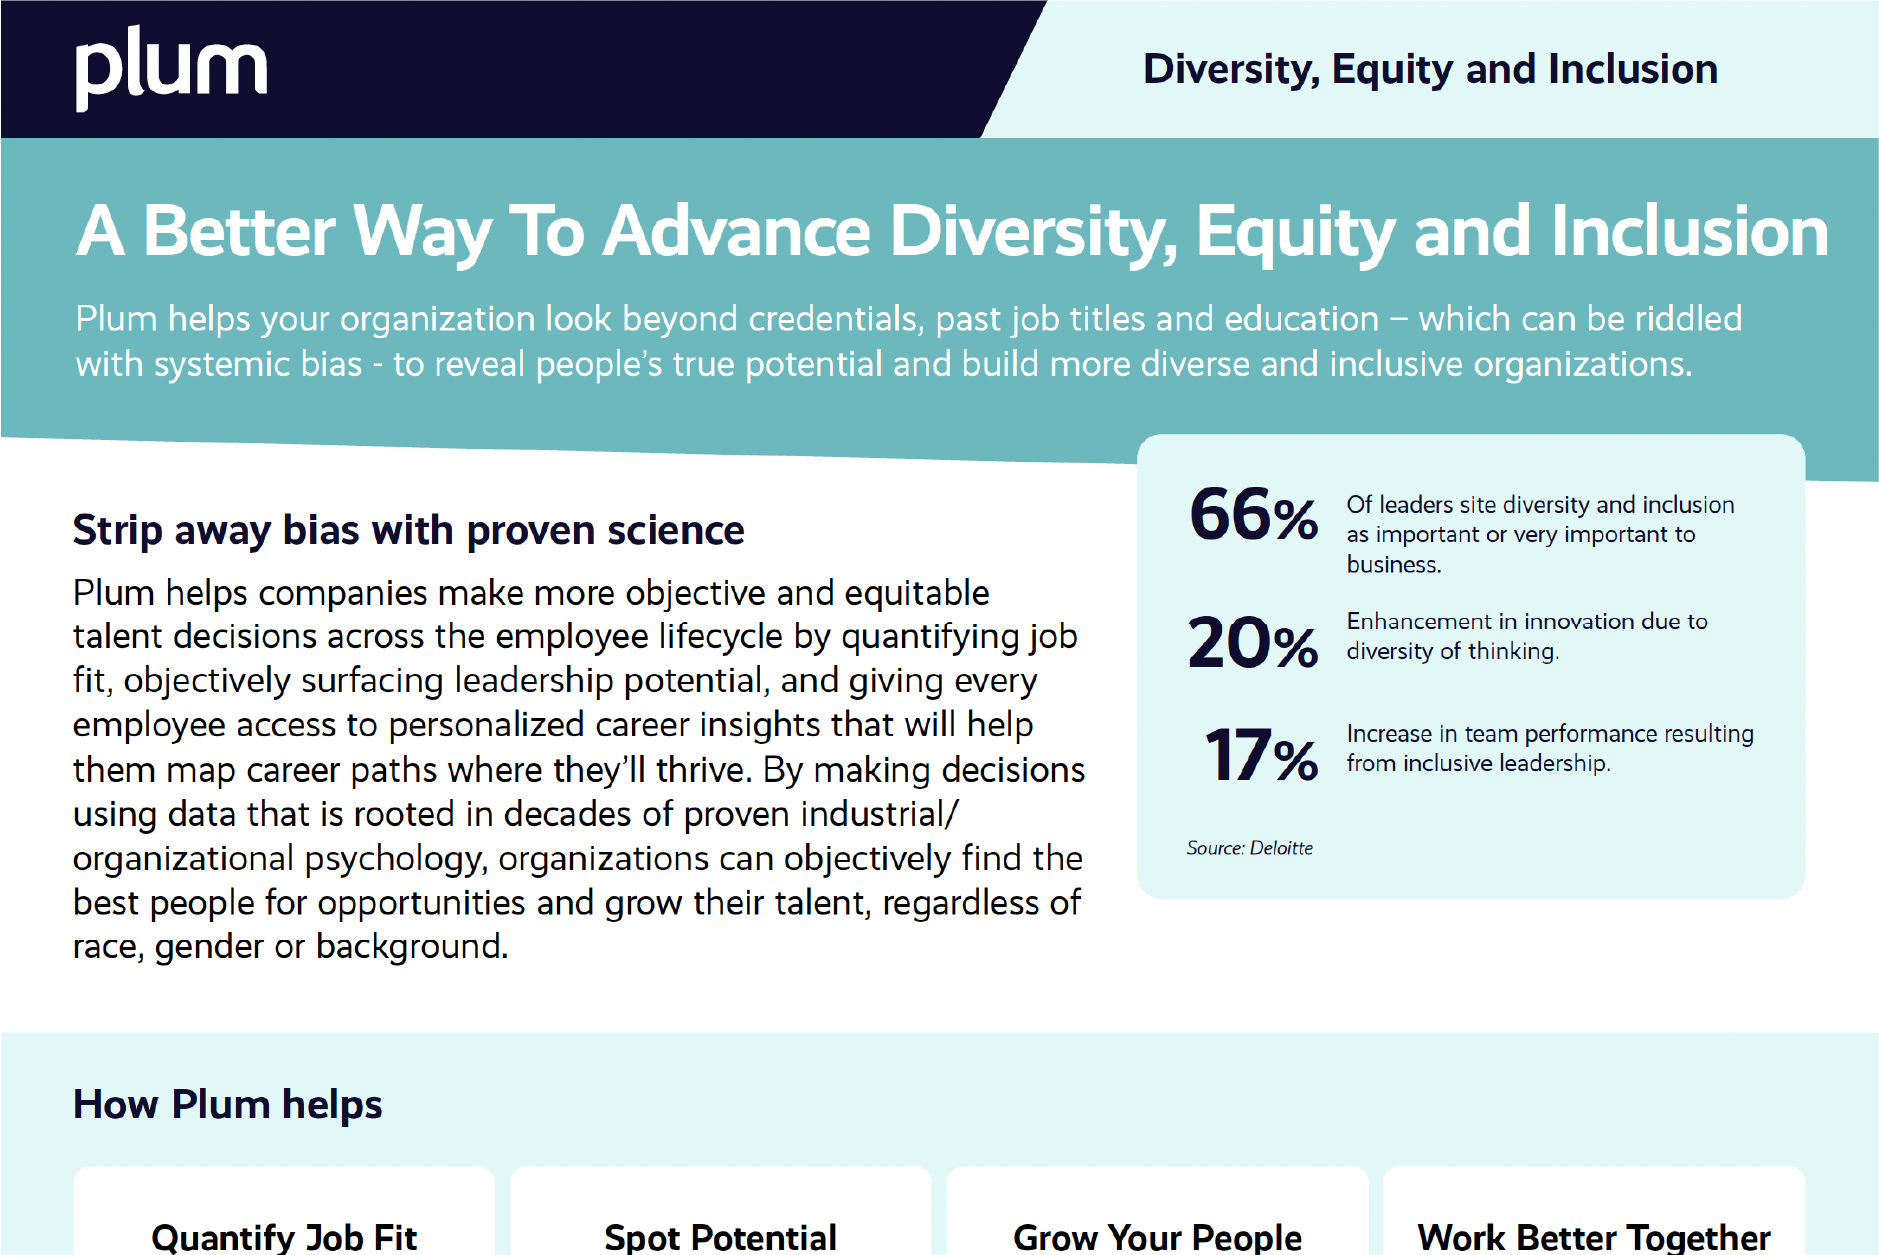 Diversity, Equity & Inclusion Brochure